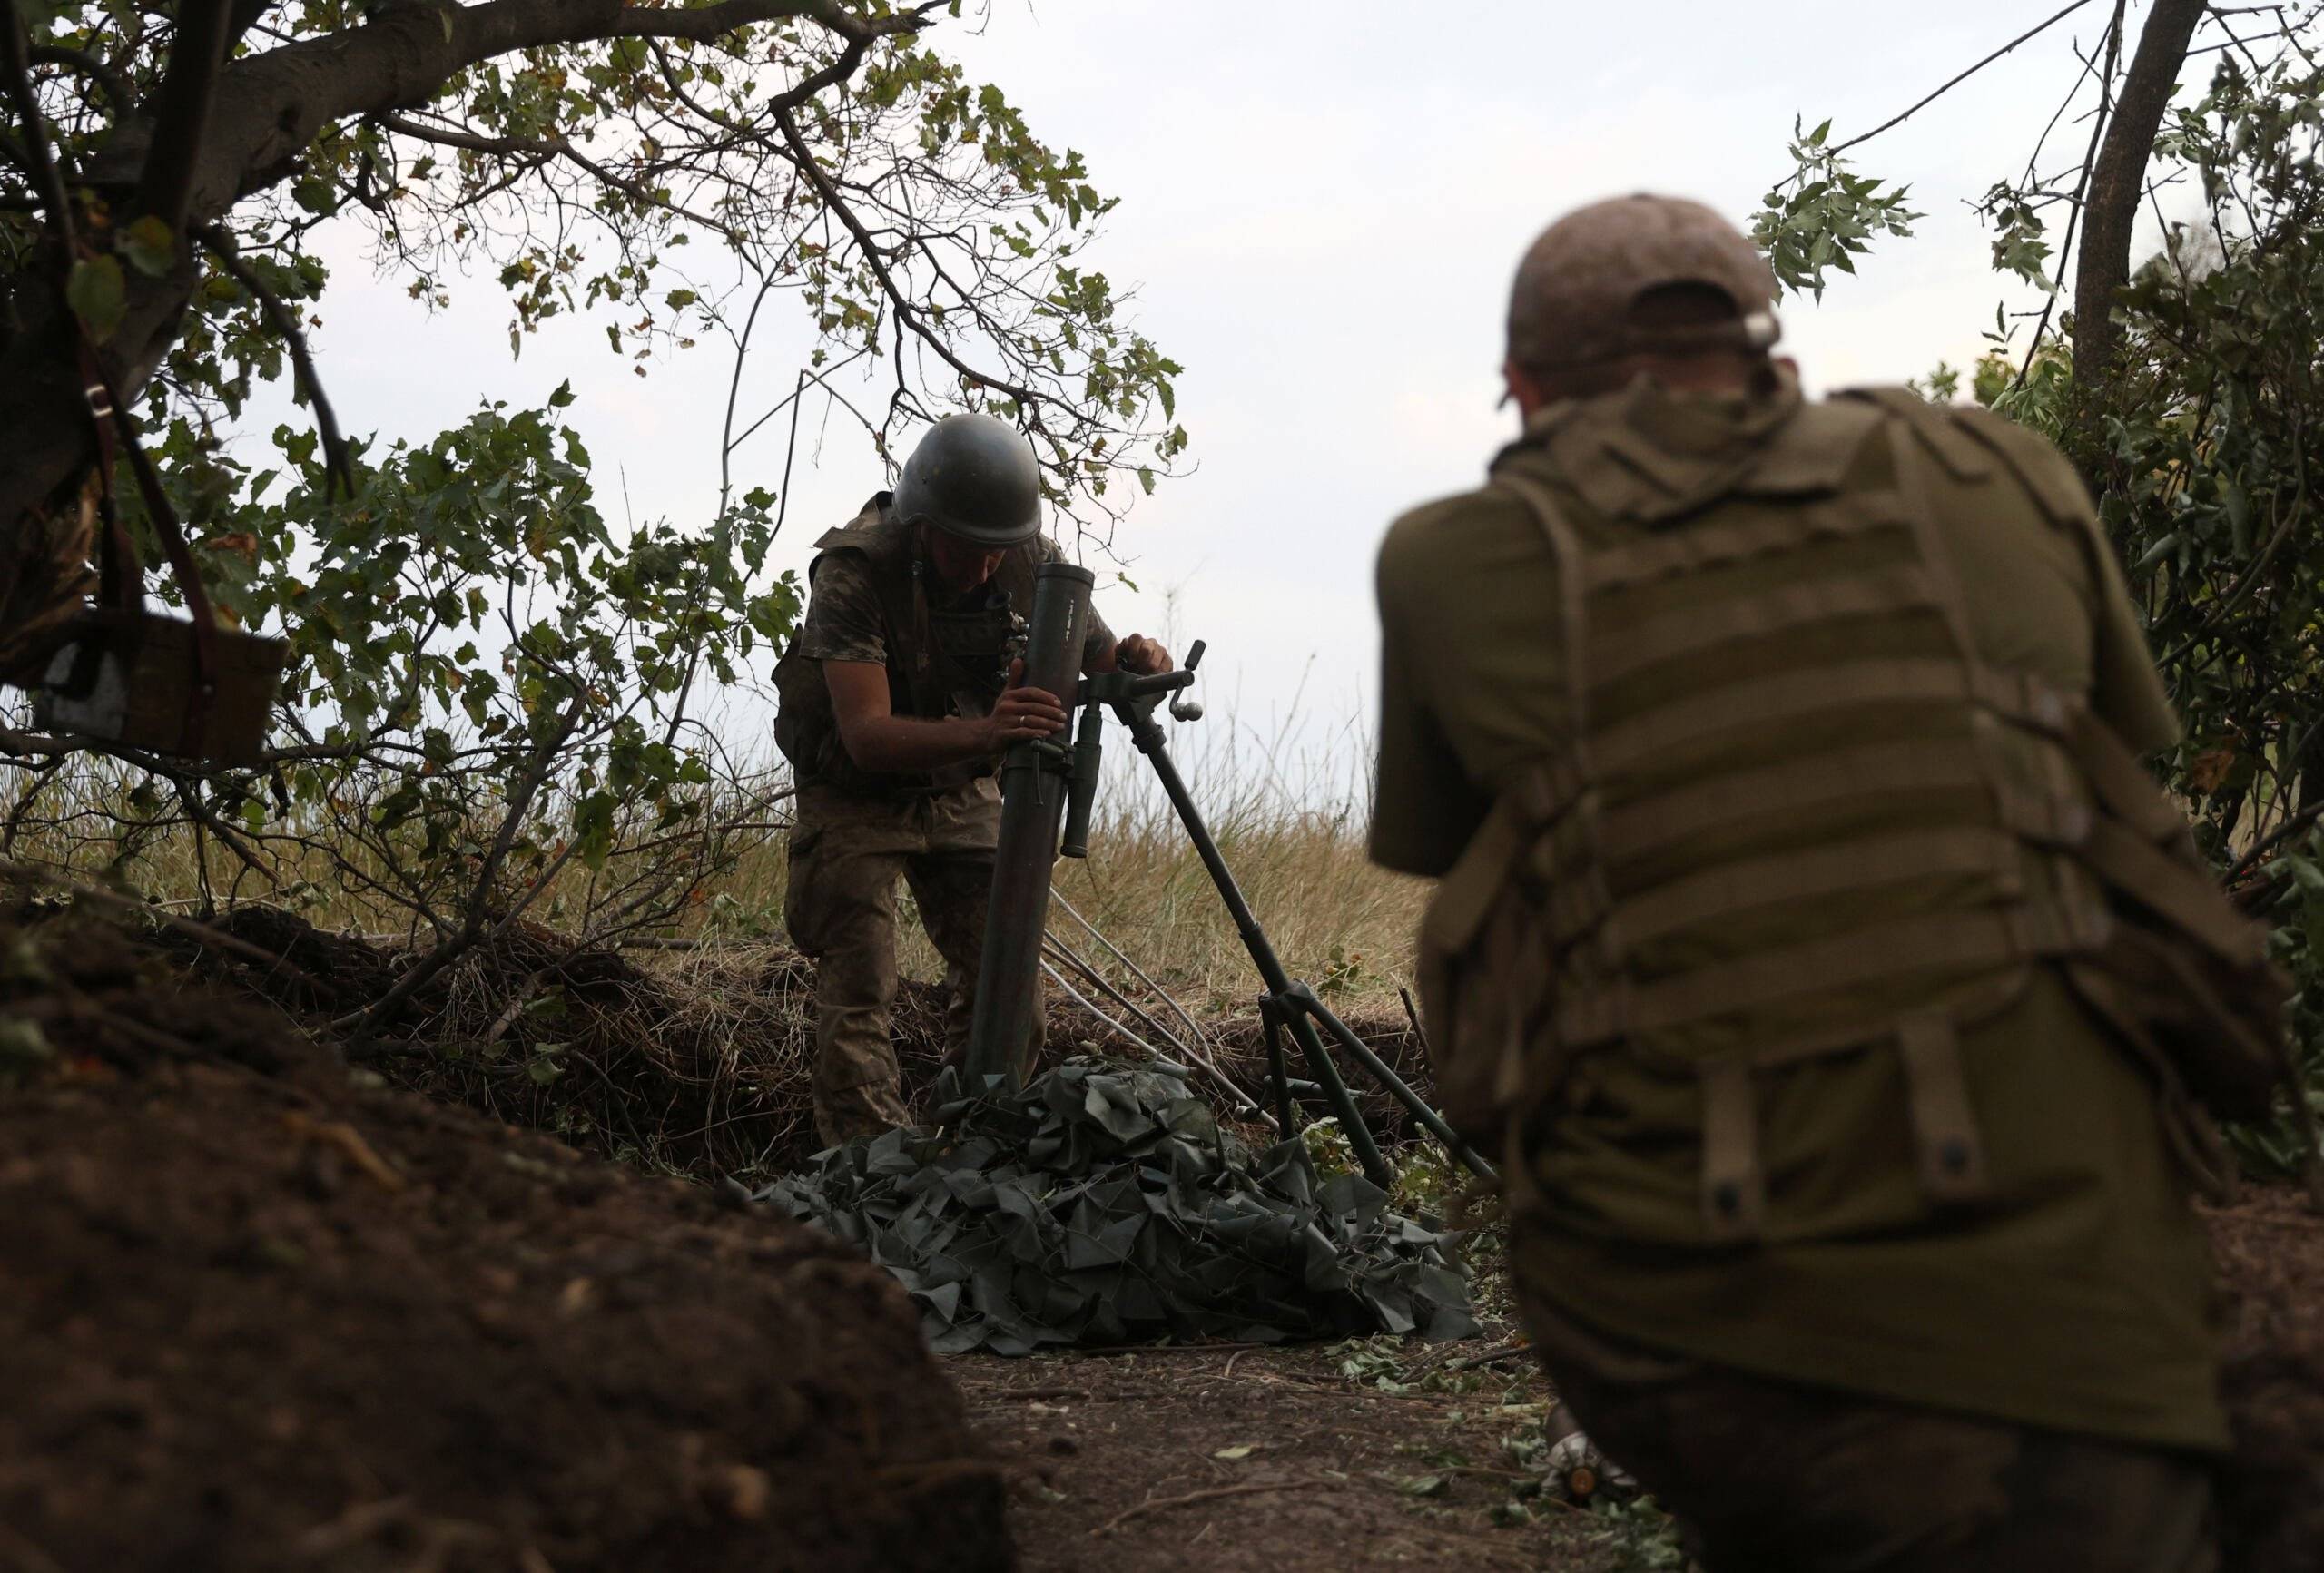 Ukrainian soldiers prepare a mortar launcher at a position along the front line in the Donetsk region on August 15, 2022, amid Russia's invasion of Ukraine. (Photo by Anatolii Stepanov / AFP)